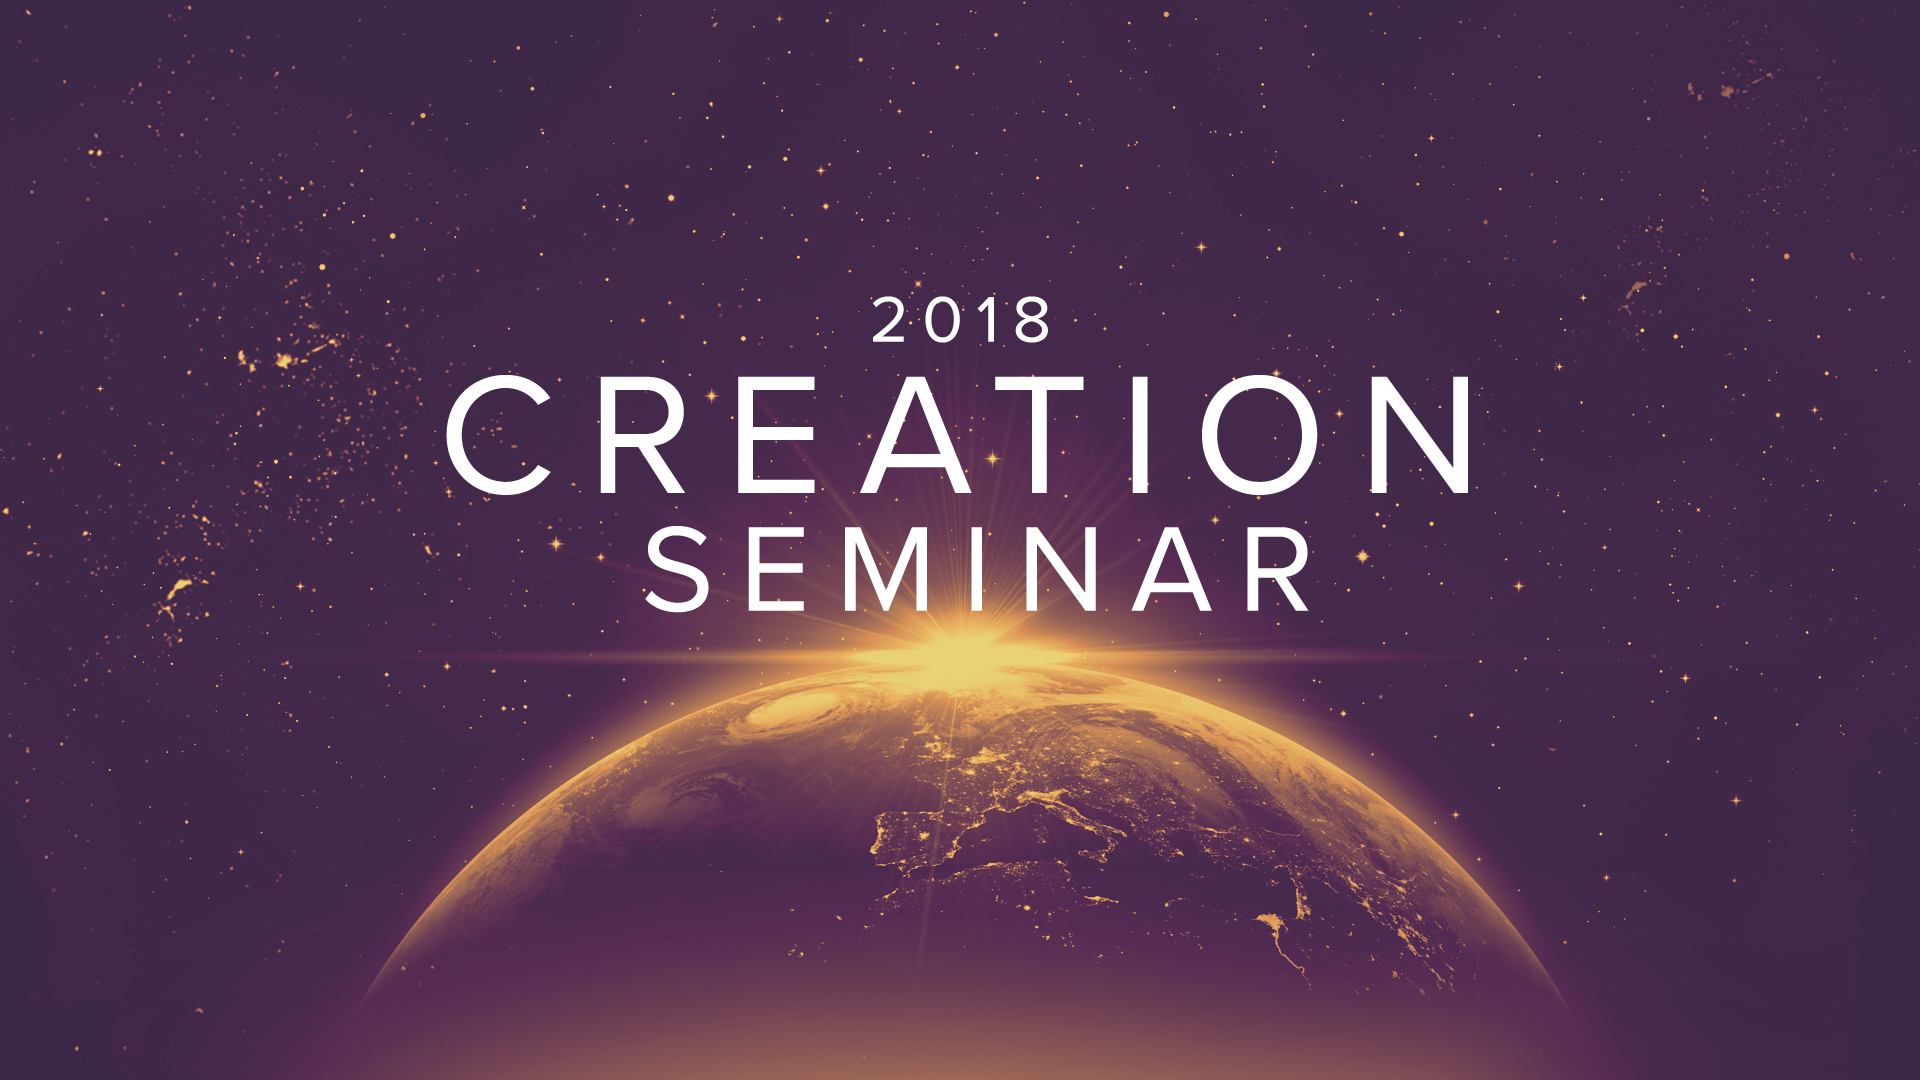 2018 Creation Seminar graphic with the Earth in the background